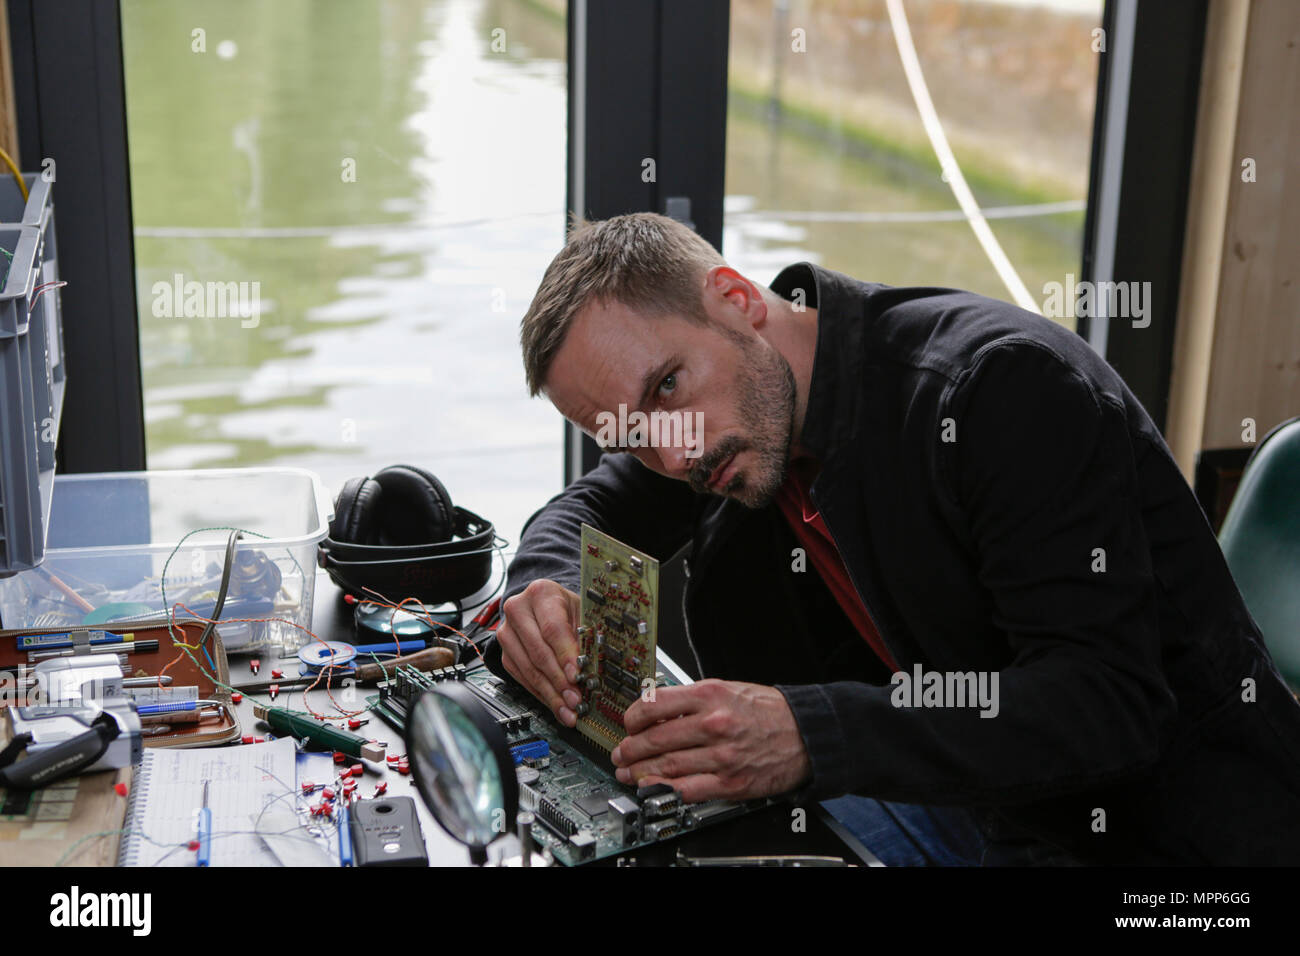 Frankfurt, Germany. 24th May 2018. Actors Wanja Mues poses on the desk in the houseboat that is owned by Mues' character Leo in the TV show, working on a computer circuit board. 4 new episodes of the relaunch of the long running TV series 'Ein Fall fuer zwei’ (A case for two) are being filmed in Frankfurt for the German state TV broadcaster ZDF (Zweites Deutsches Fernsehen). It stars Antoine Monot, Jr. as defence attorney Benjamin ‘Benni’ Hornberg and Wanja Mues as private investigator Leo Oswald. The episodes are directed by Thomas Nennstiel. The episodes are set to air in October. Stock Photo